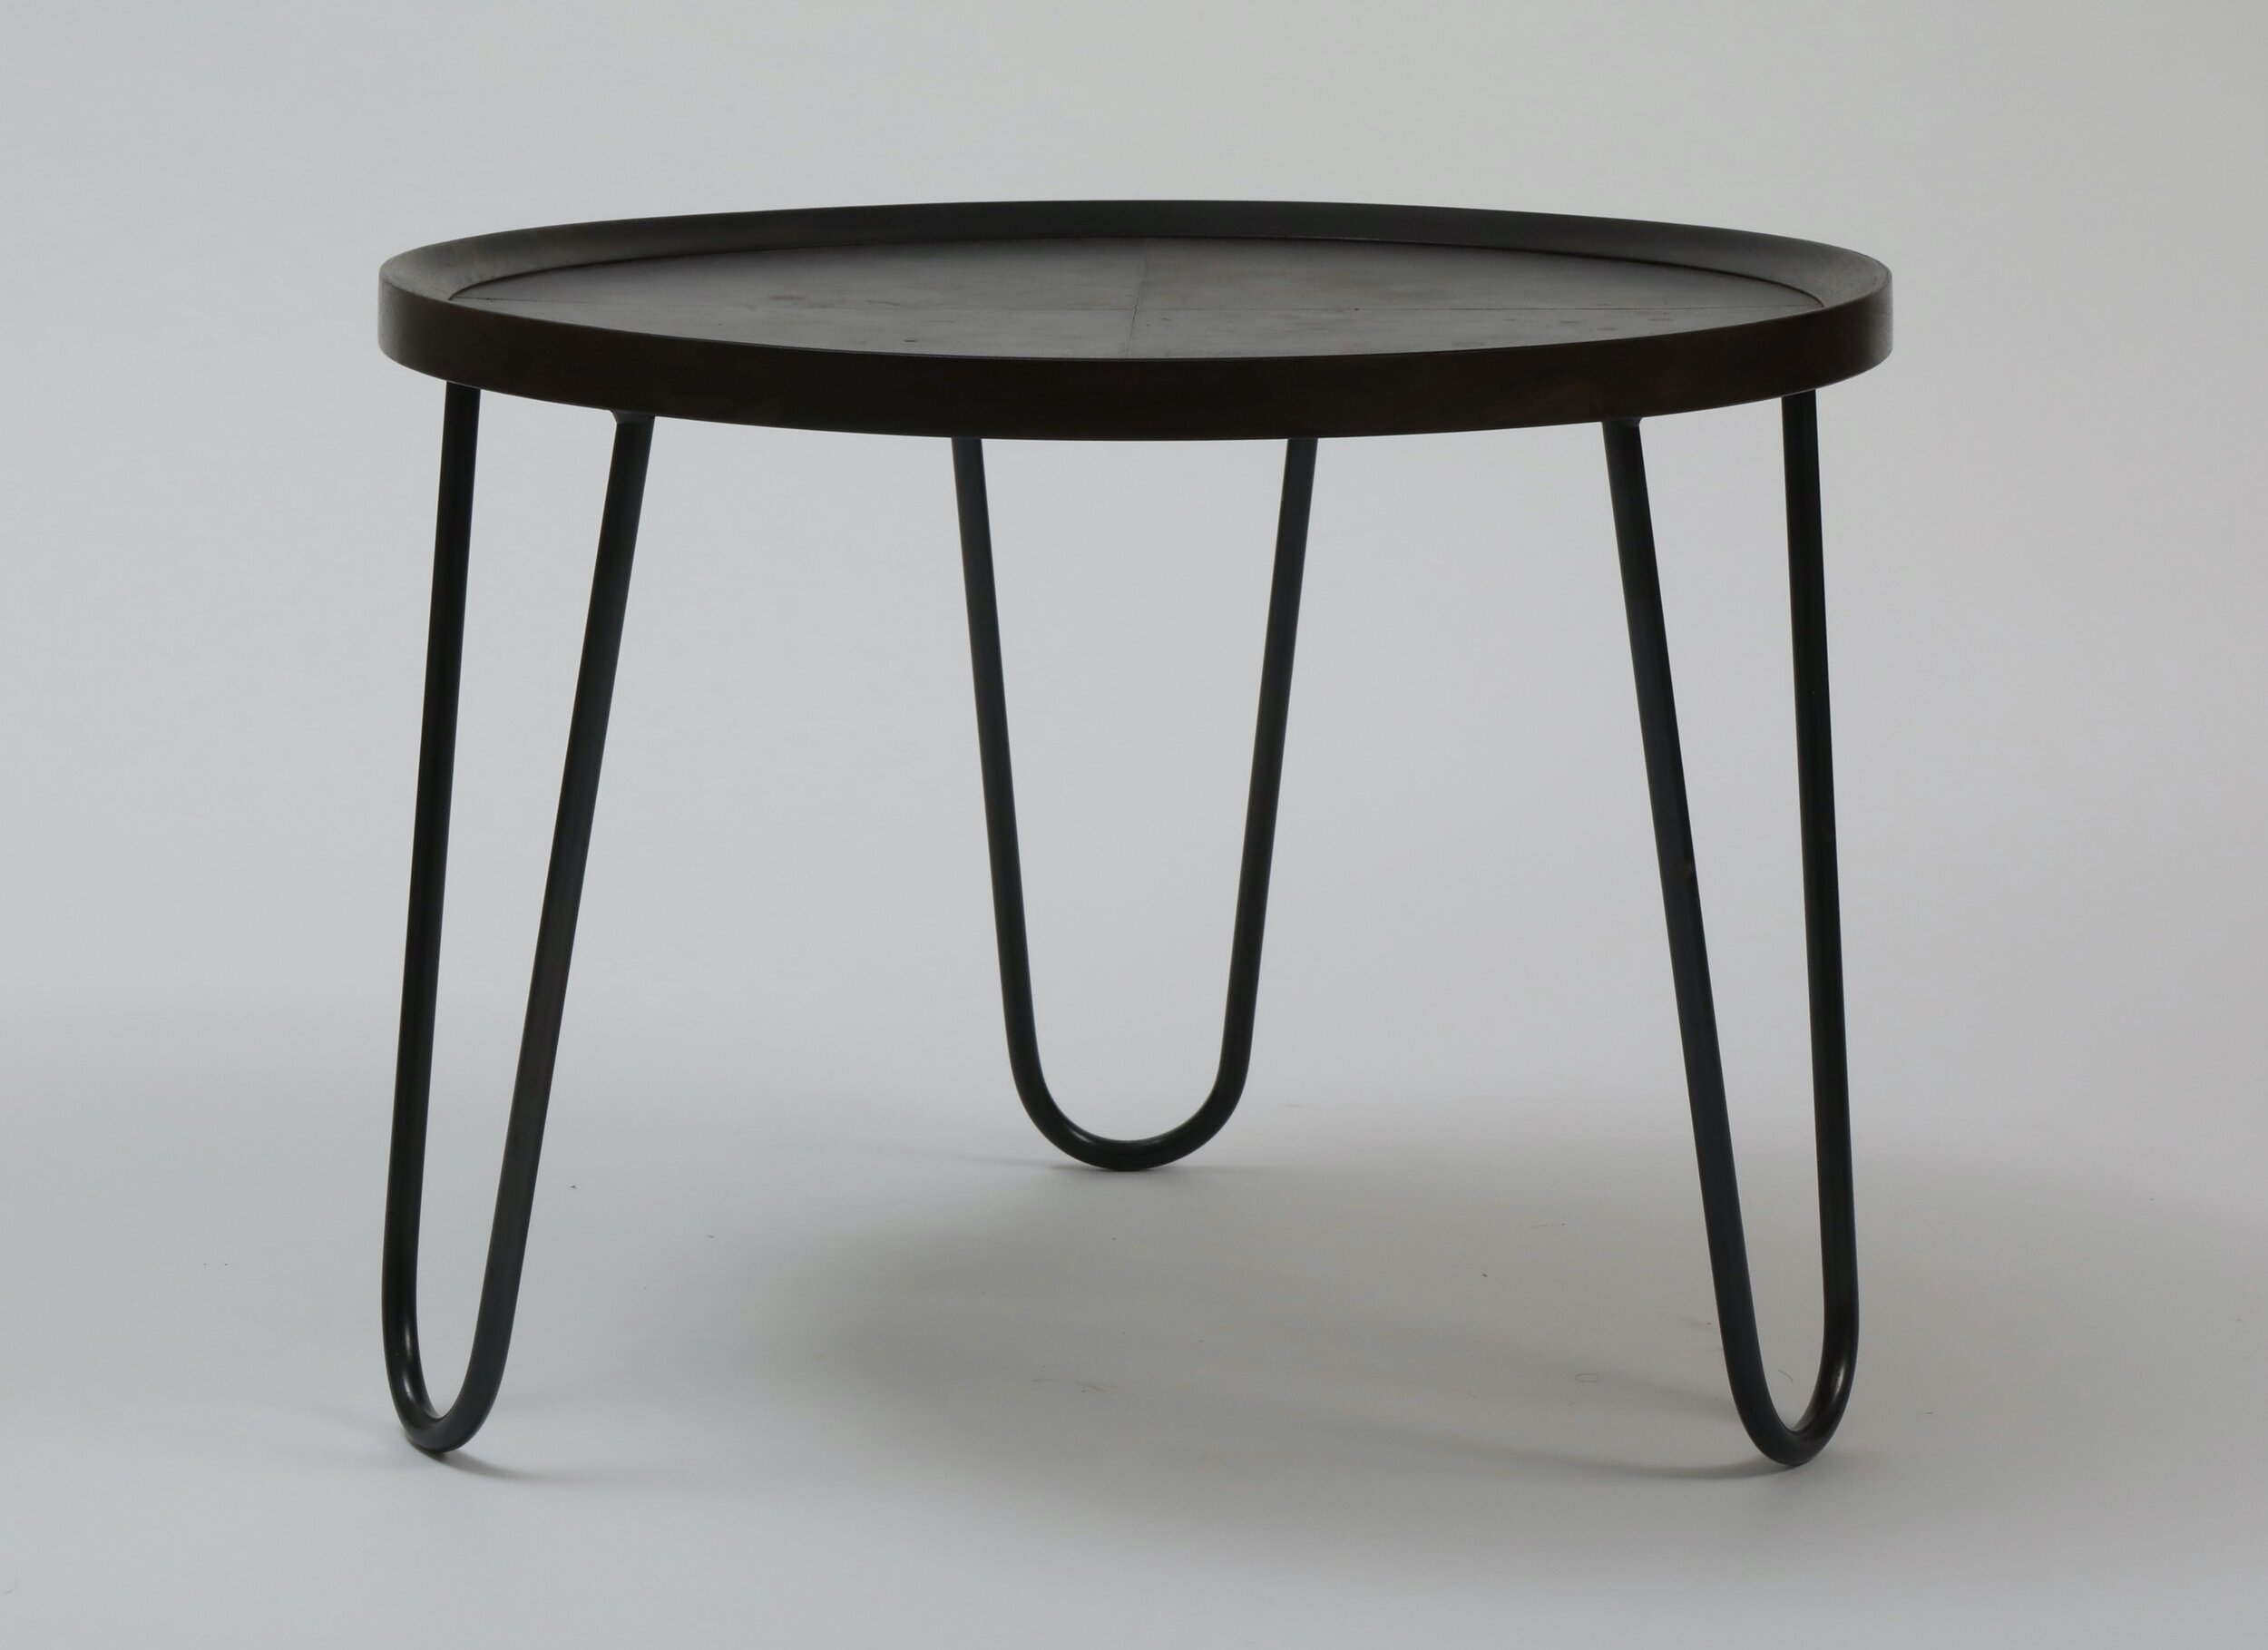   Walnut nesting tables with leather inset top - custom sizes and finishes available  